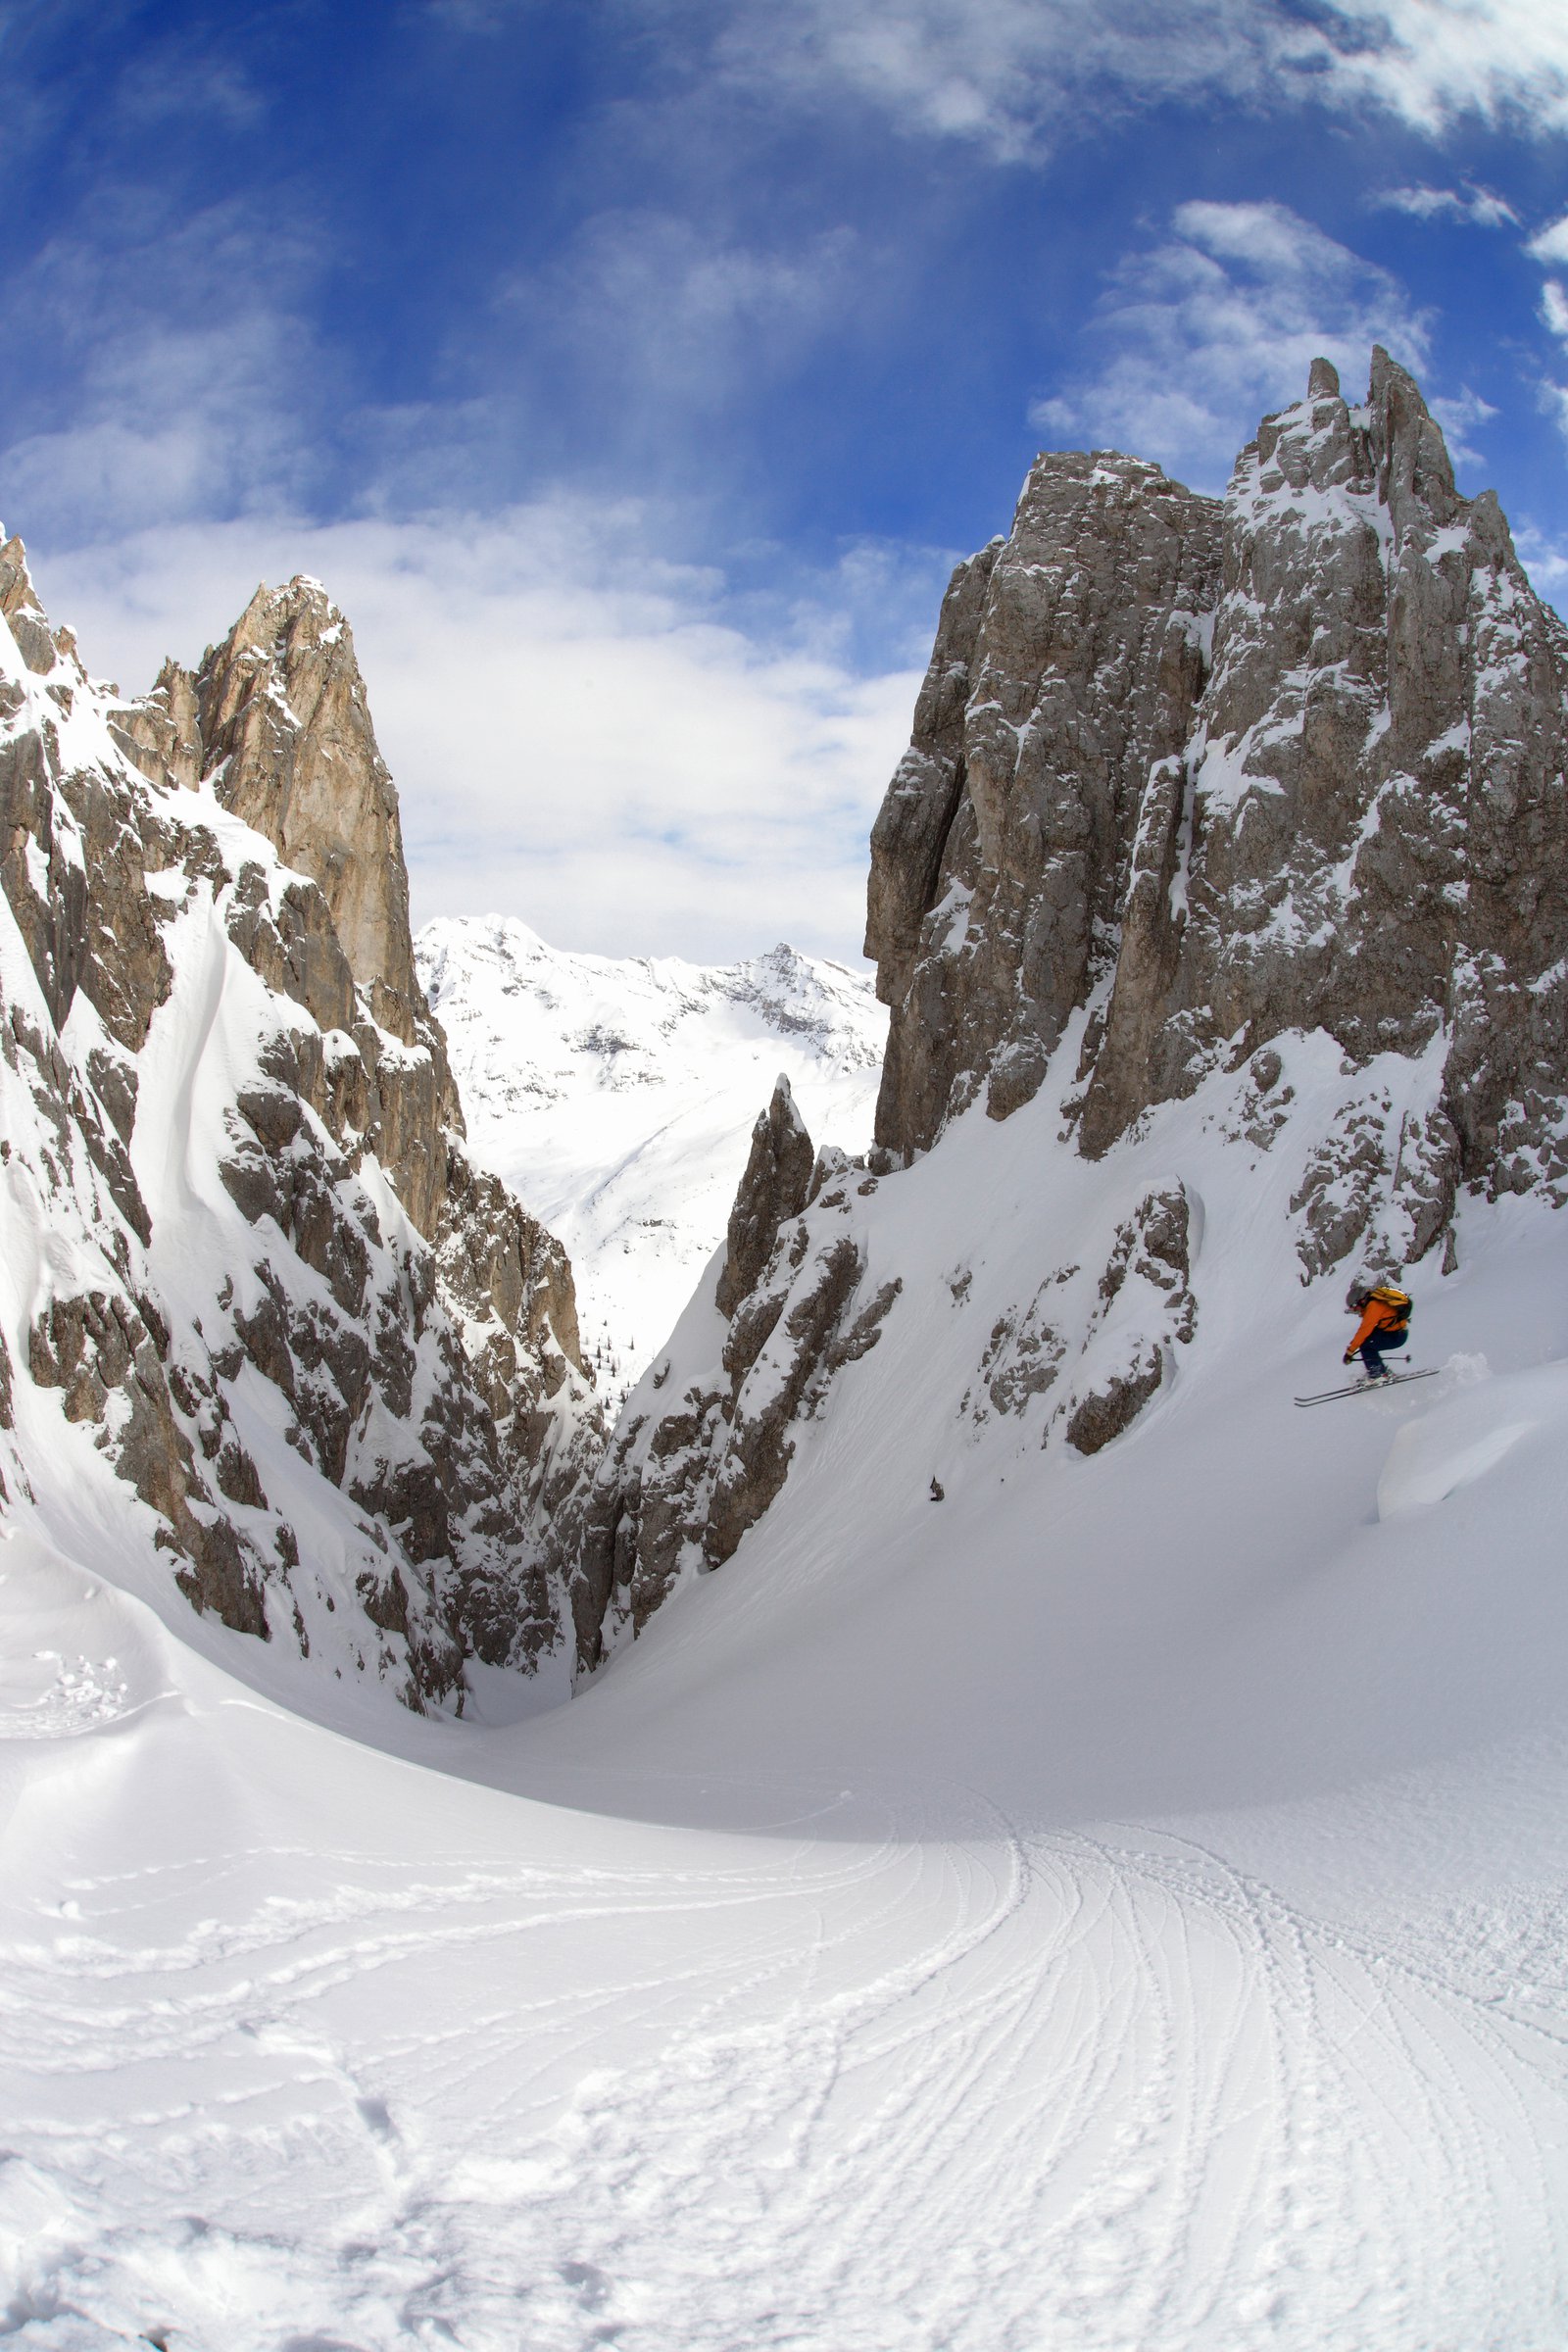 Droping in the couloir!